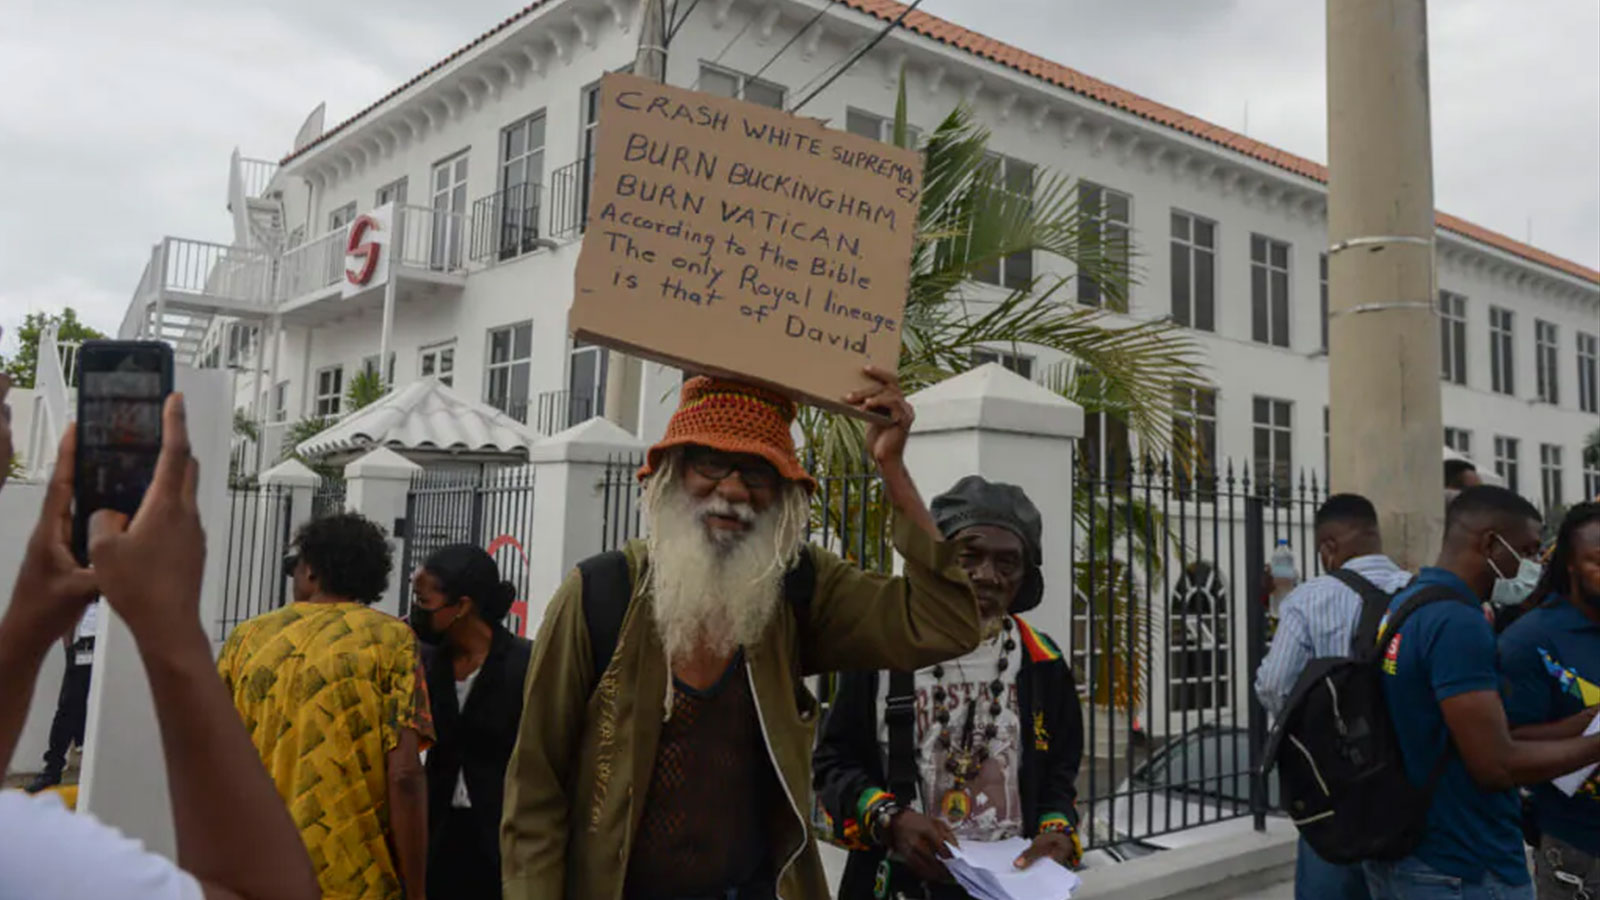 People protest to demand an apology and slavery reparations during a visit to the former British colony by the Duke and Duchess of Cambridge, Prince William and Kate, in Kingston, Jamaica, Tuesday, March 22, 2022. 